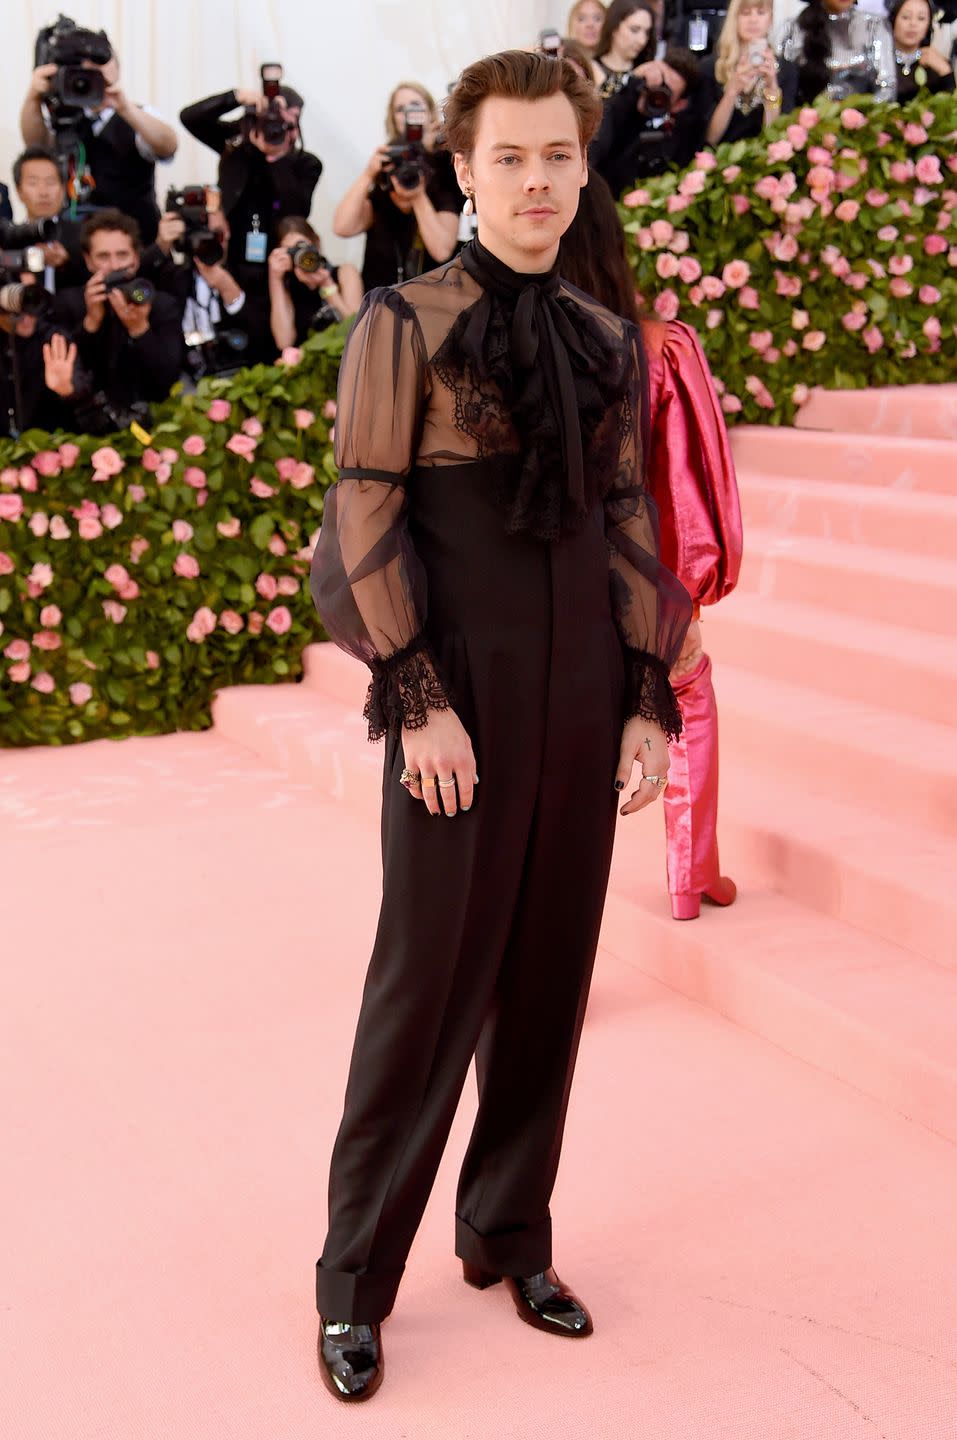 new york, new york may 06 harry styles attends the 2019 met gala celebrating camp notes on fashion at metropolitan museum of art on may 06, 2019 in new york city photo by jamie mccarthygetty images